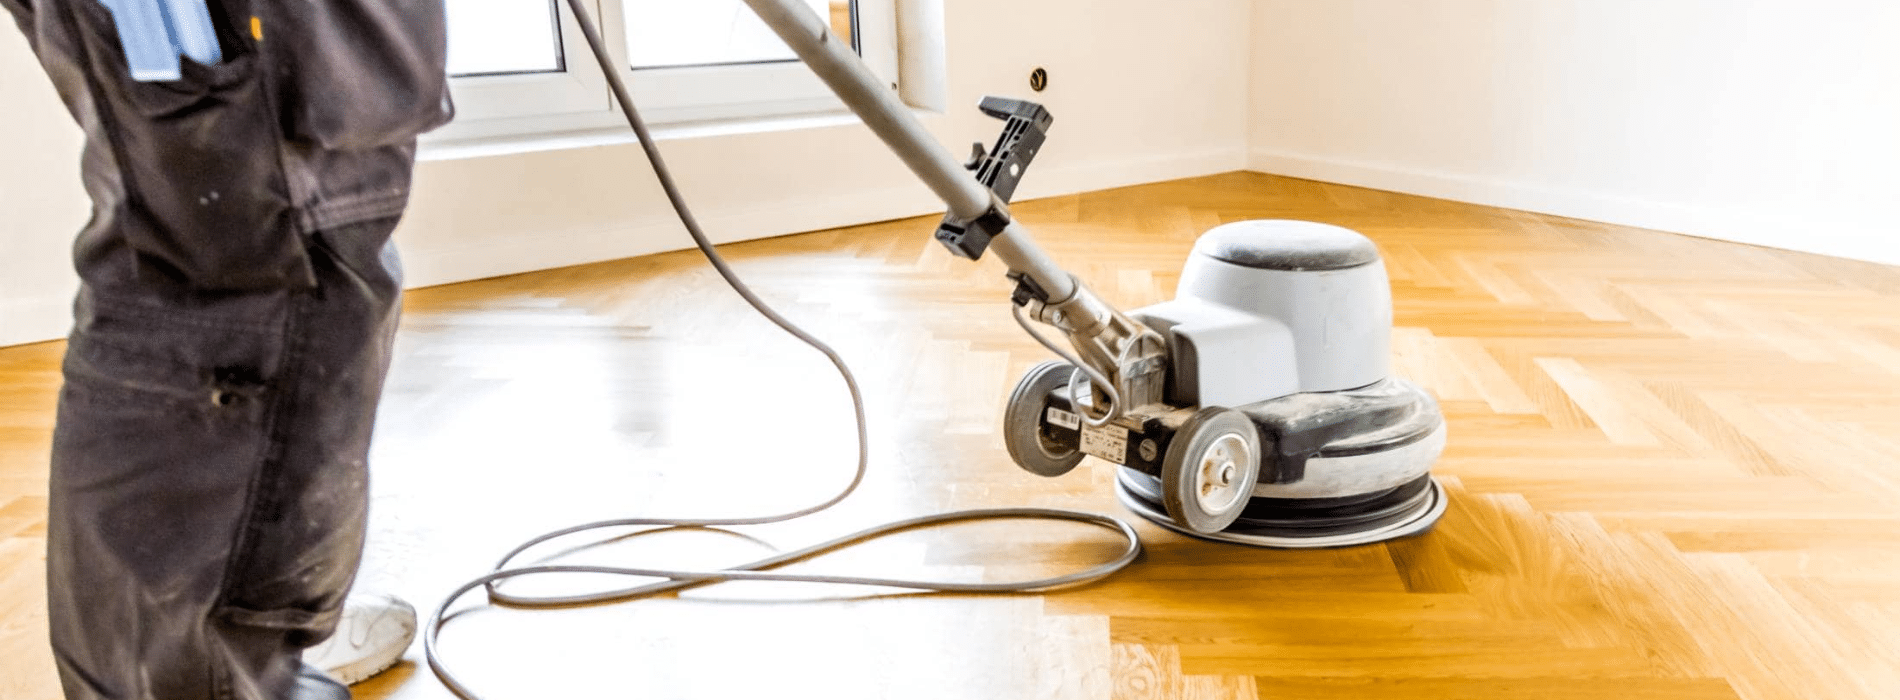 Floor sanding experts in Southgate, N14 utilizing Bona Belt for superior results. The powerful 2.2 kW sander operates at 230V, 50 Hz/60 Hz frequency. Connected to a HEPA-filtered dust extraction system, it guarantees a clean and efficient outcome. Achieving flawless floor restoration in Southgate, N14.